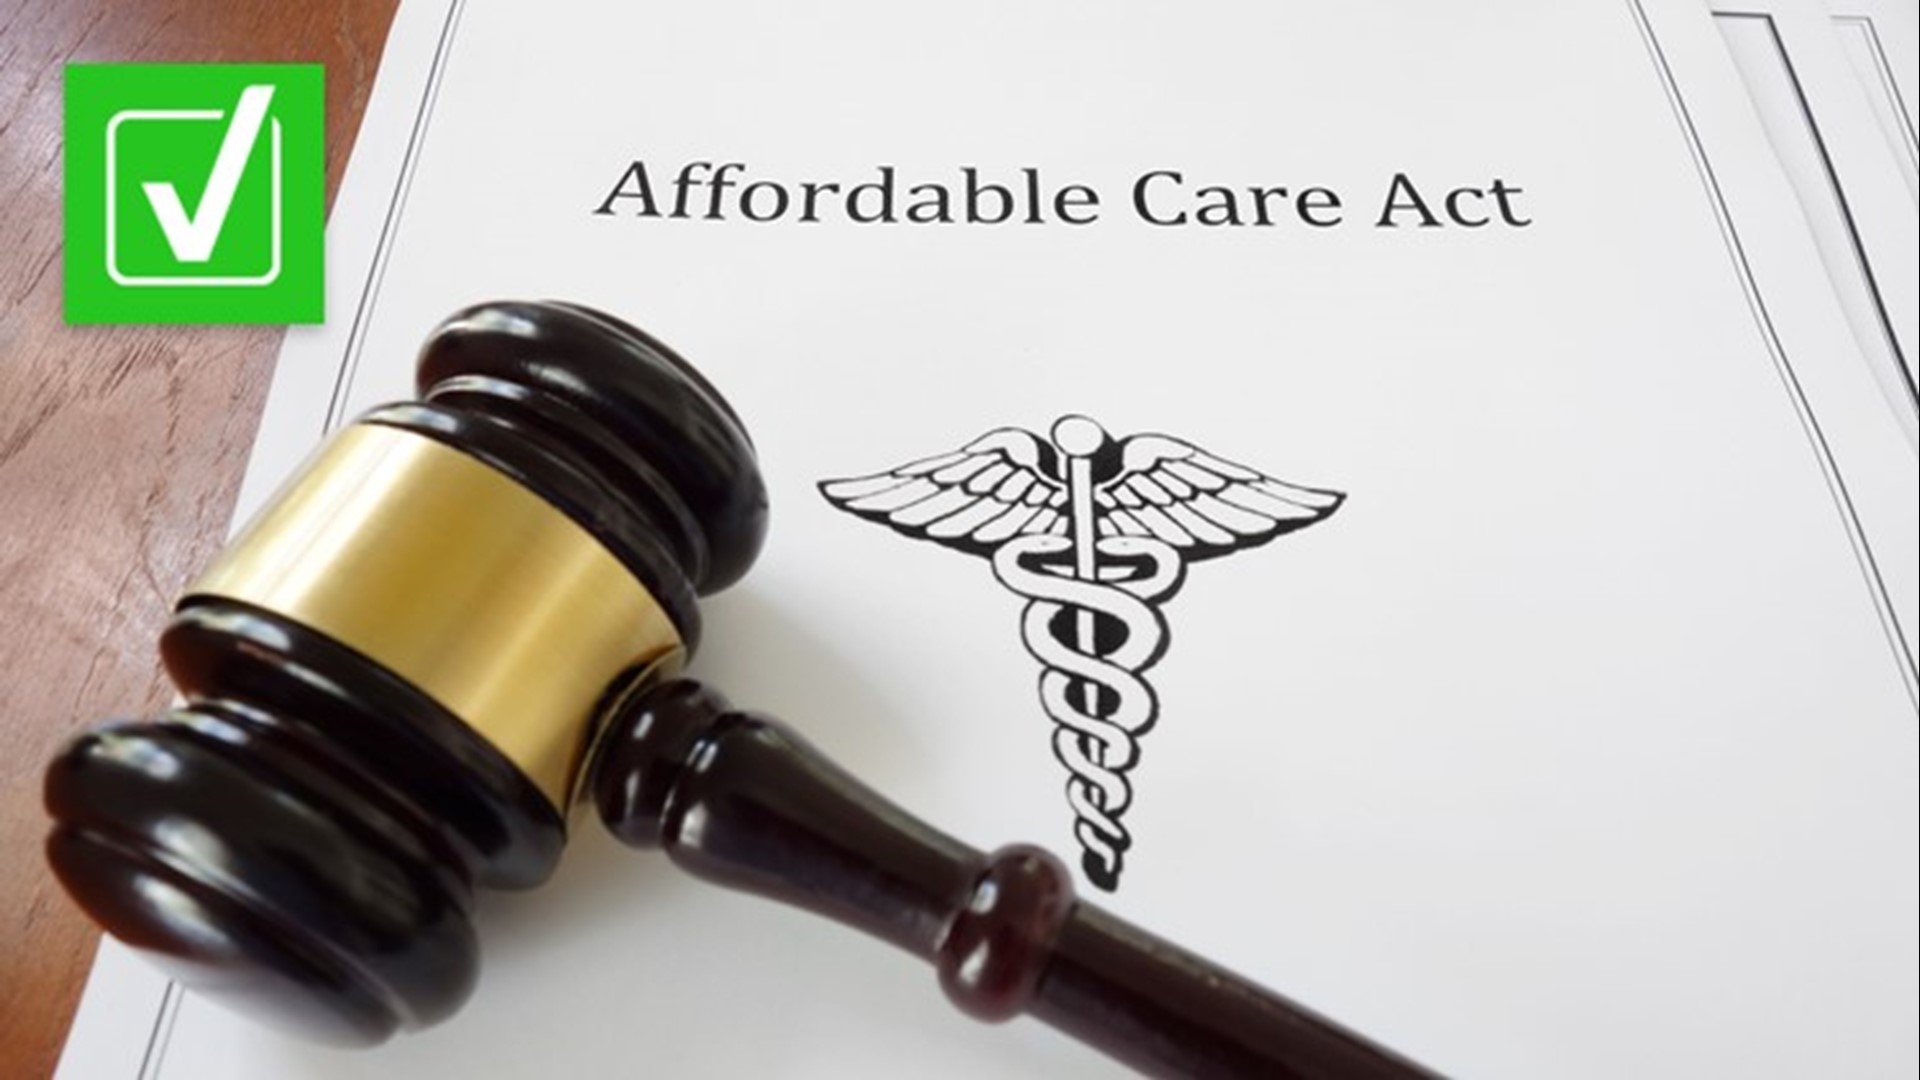 The Supreme Court has upheld the Affordable Care Act in three separate challenges since it was passed in 2012.